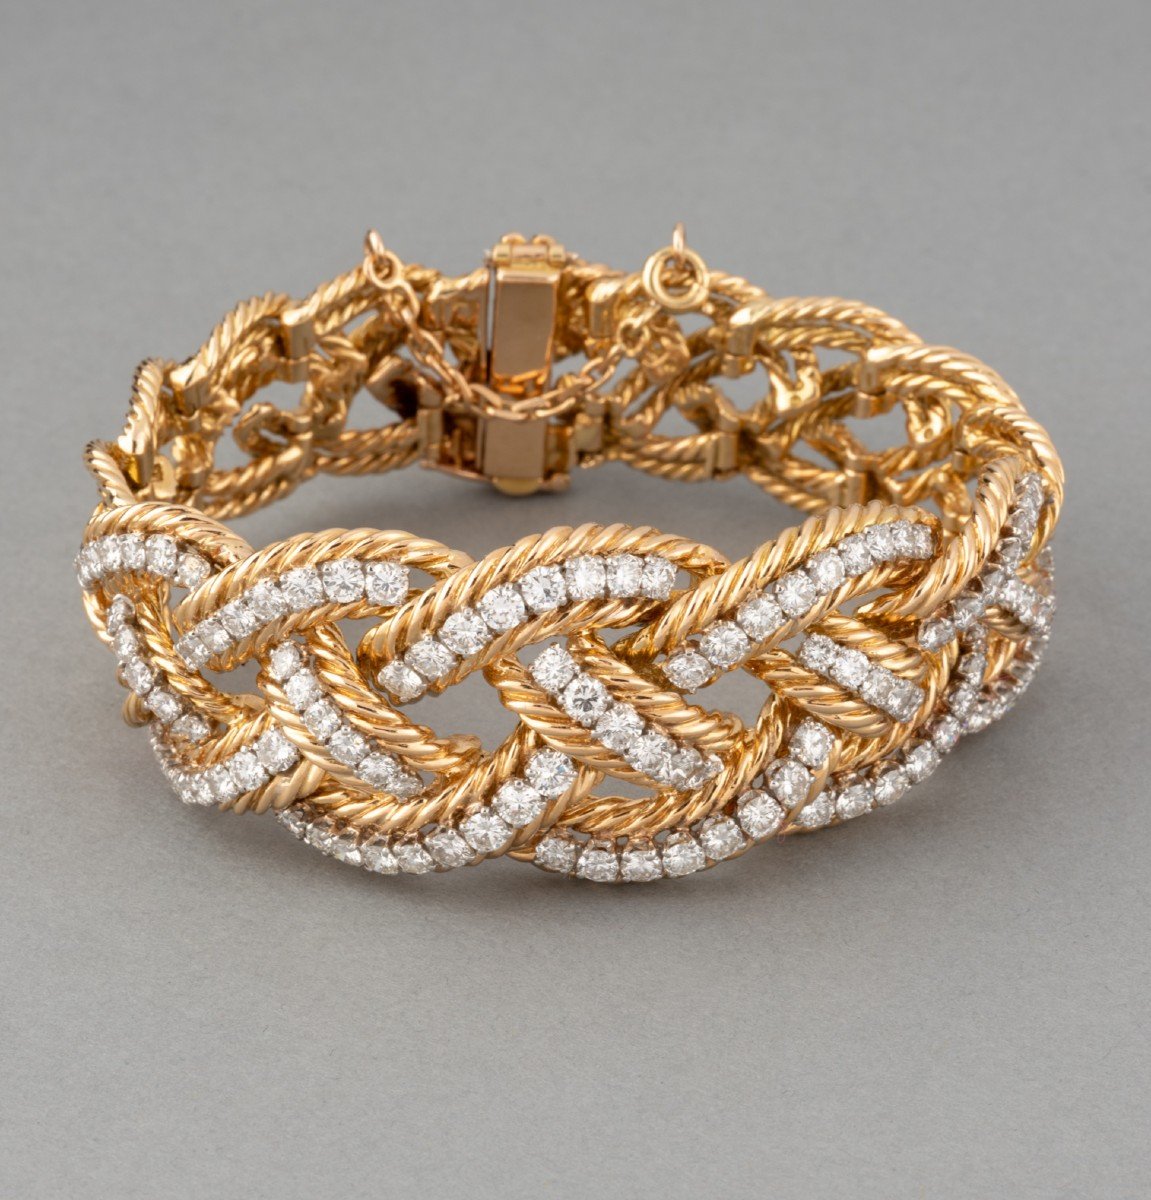 Vintage French Bracelet In Gold And 9 Carat Diamonds